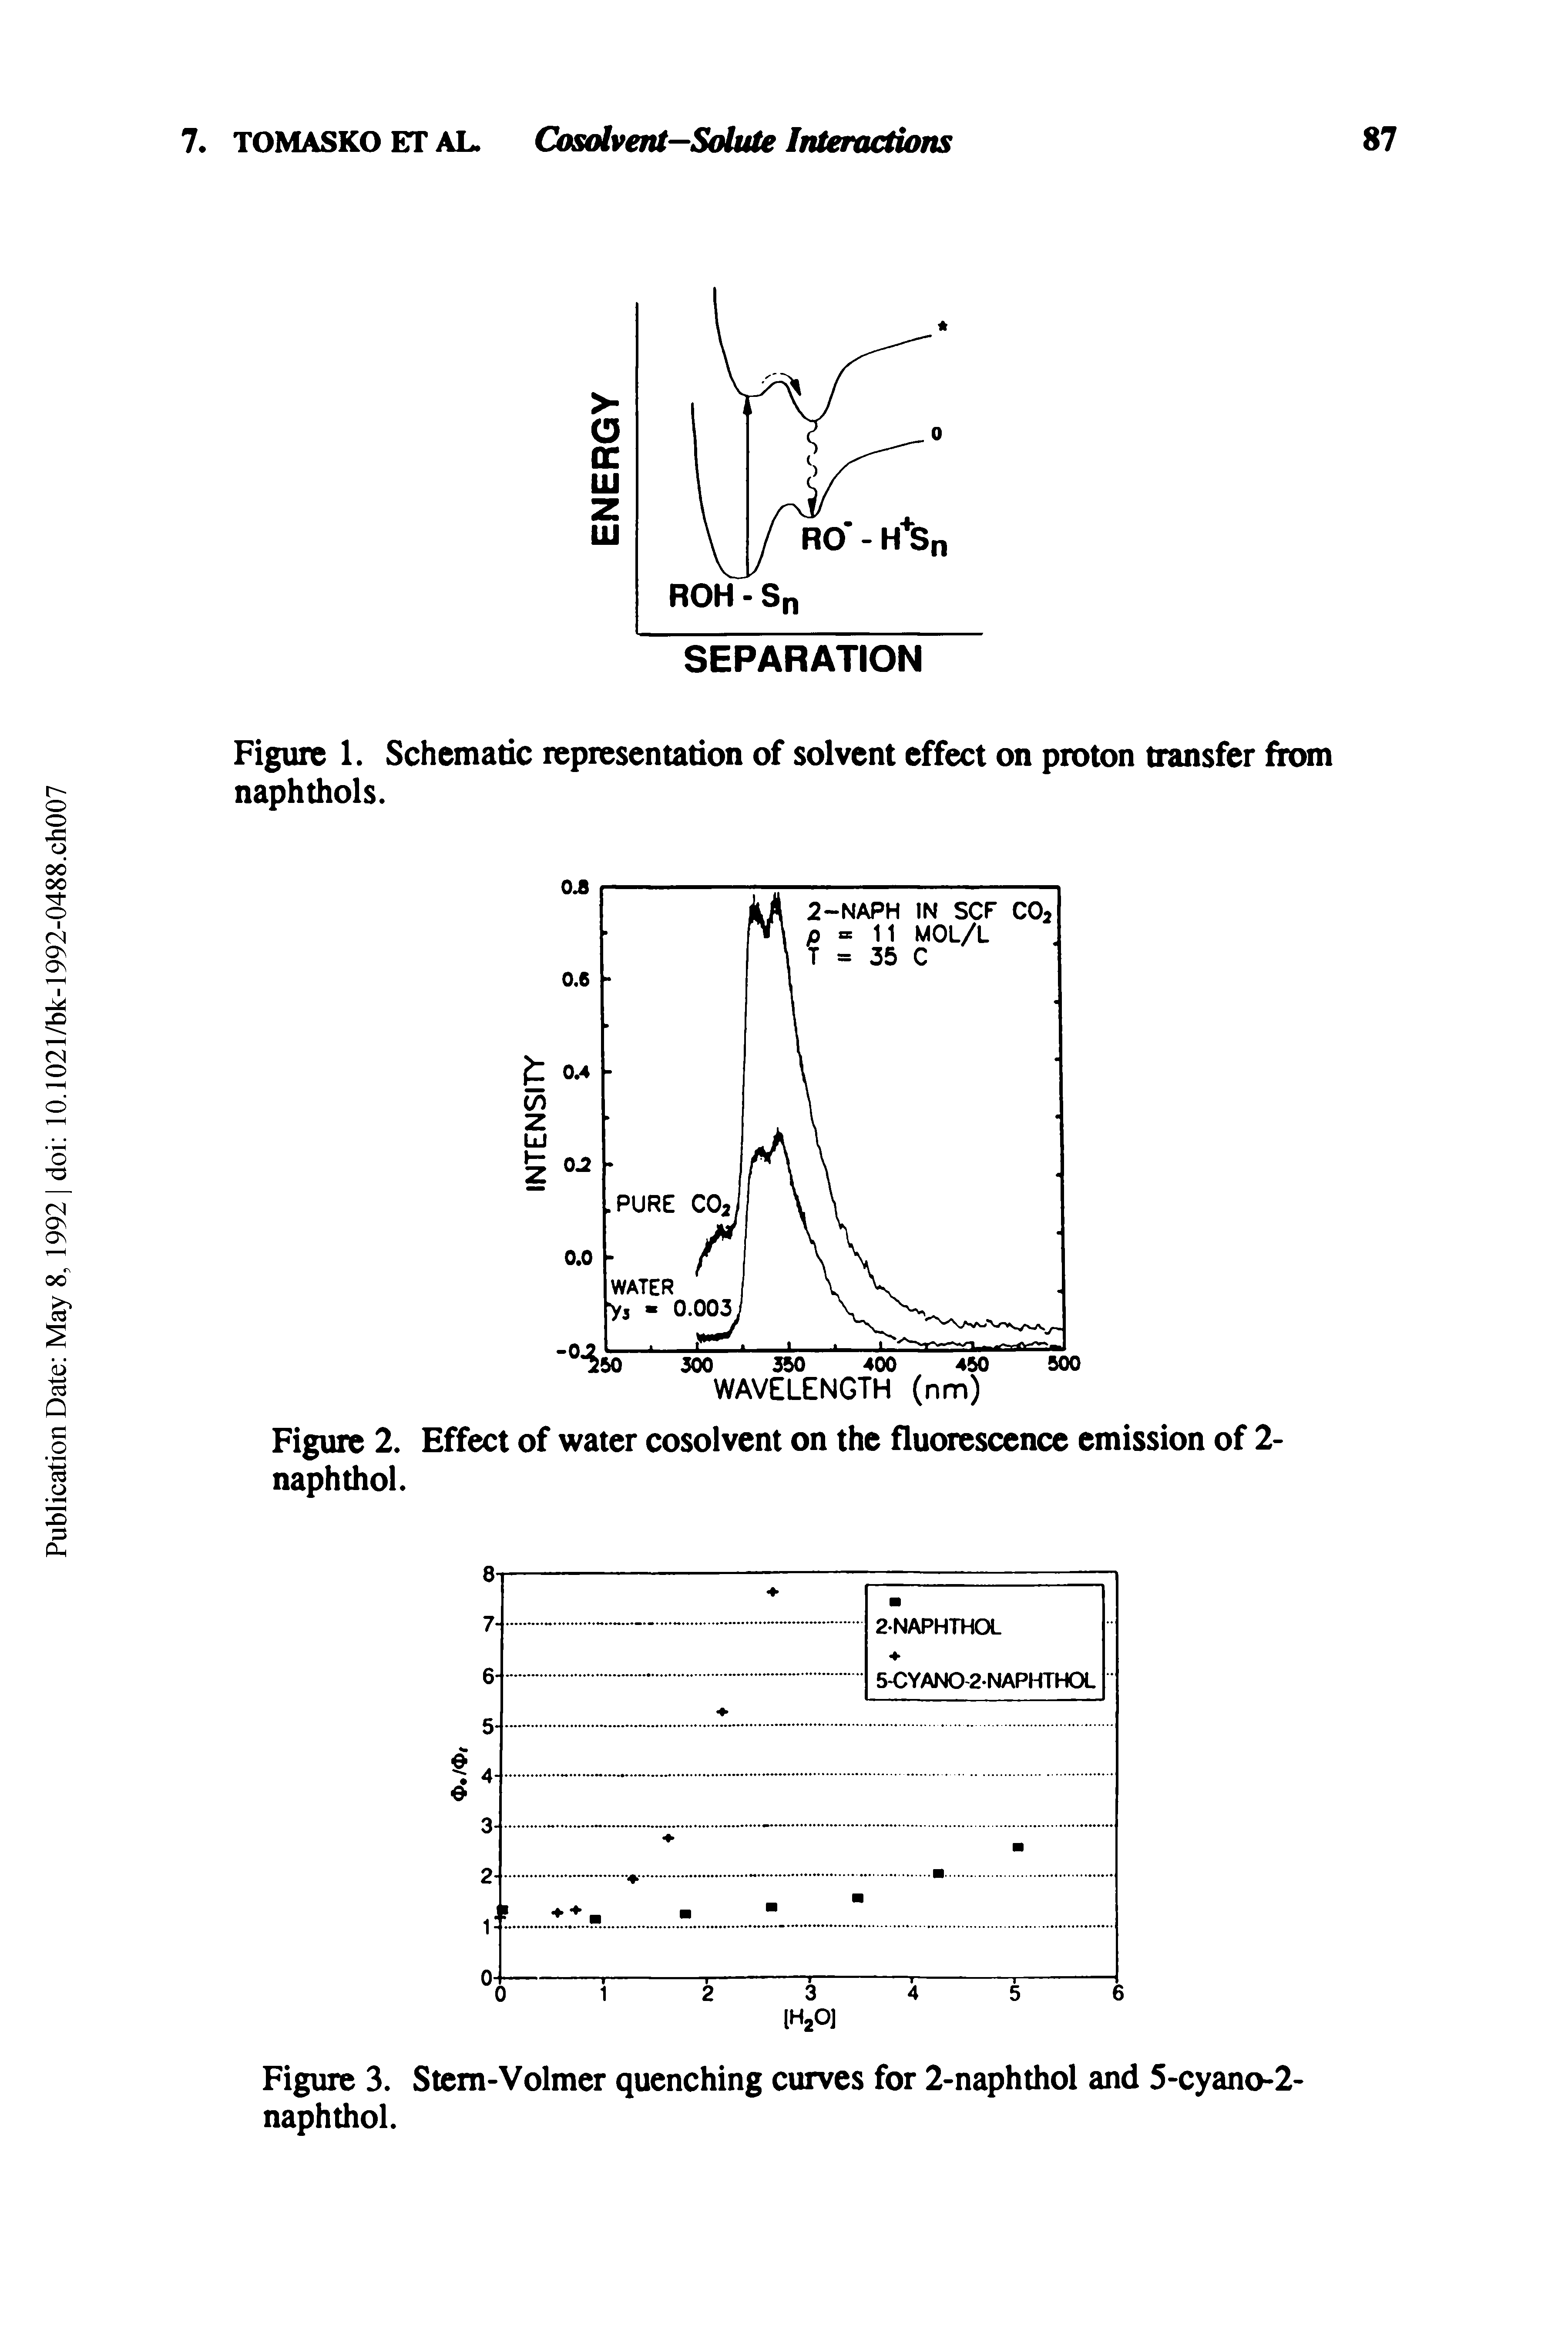 Figure 1. Schematic representation of solvent effect on proton transfer from naphthols.